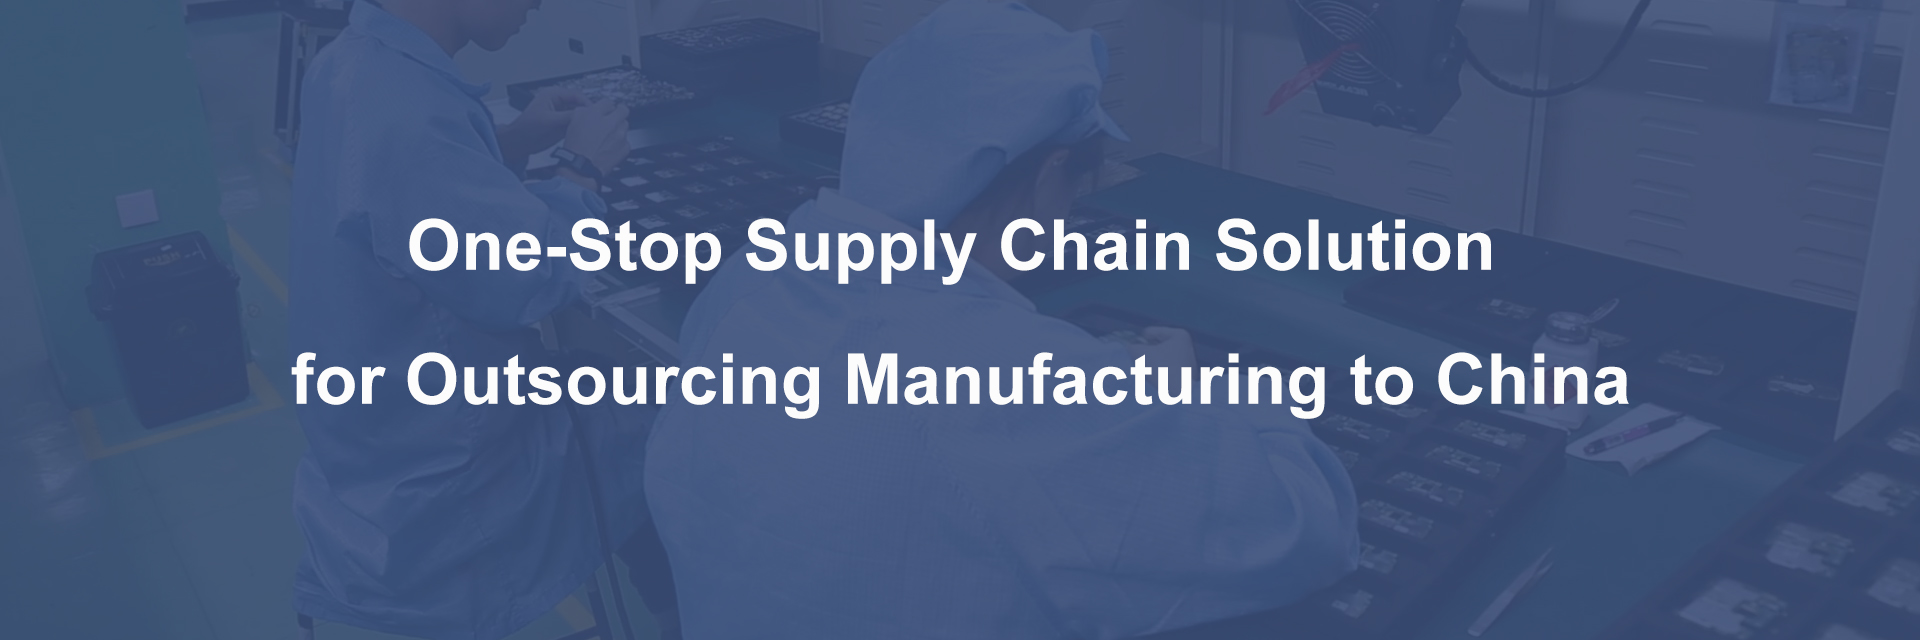 One-Stop Supply Chain Solution